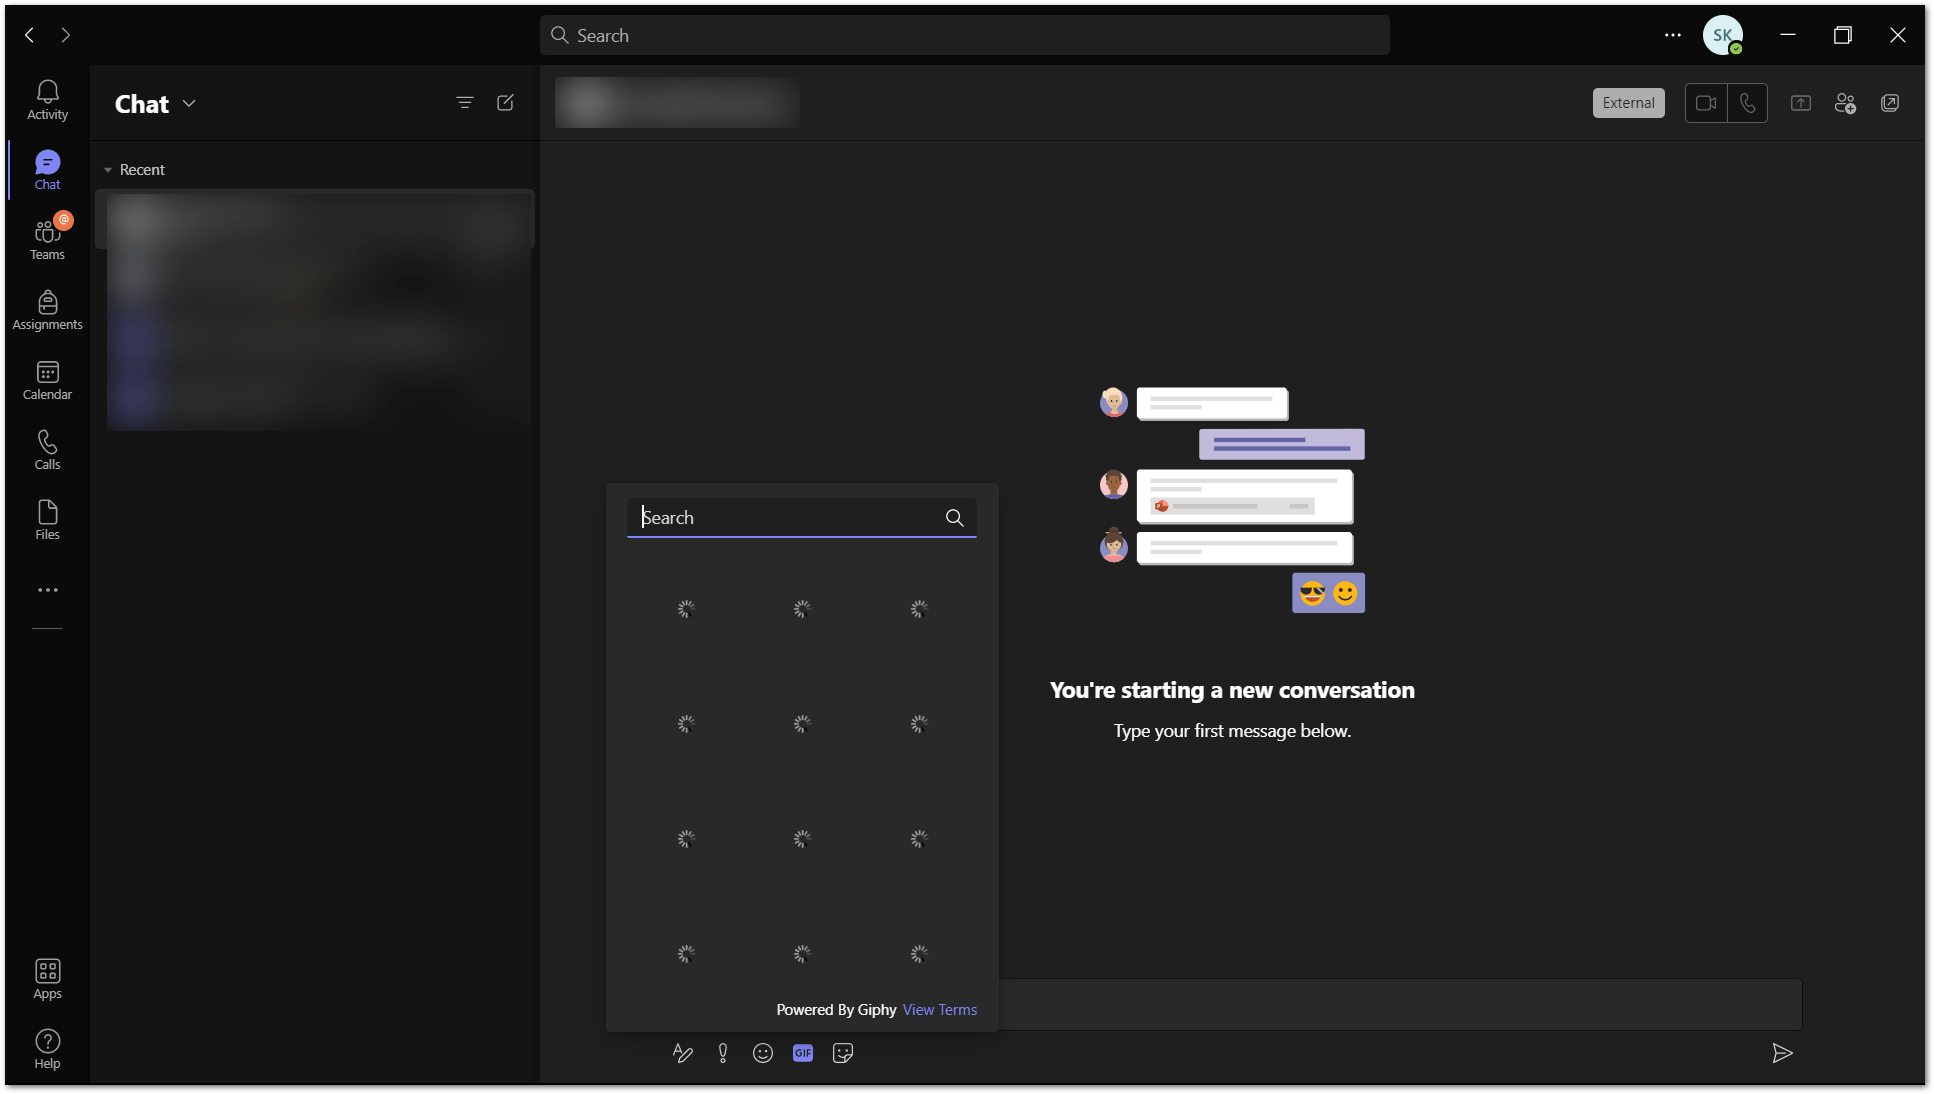 Microsoft Teams GIFs not showing, loading, displaying or playing